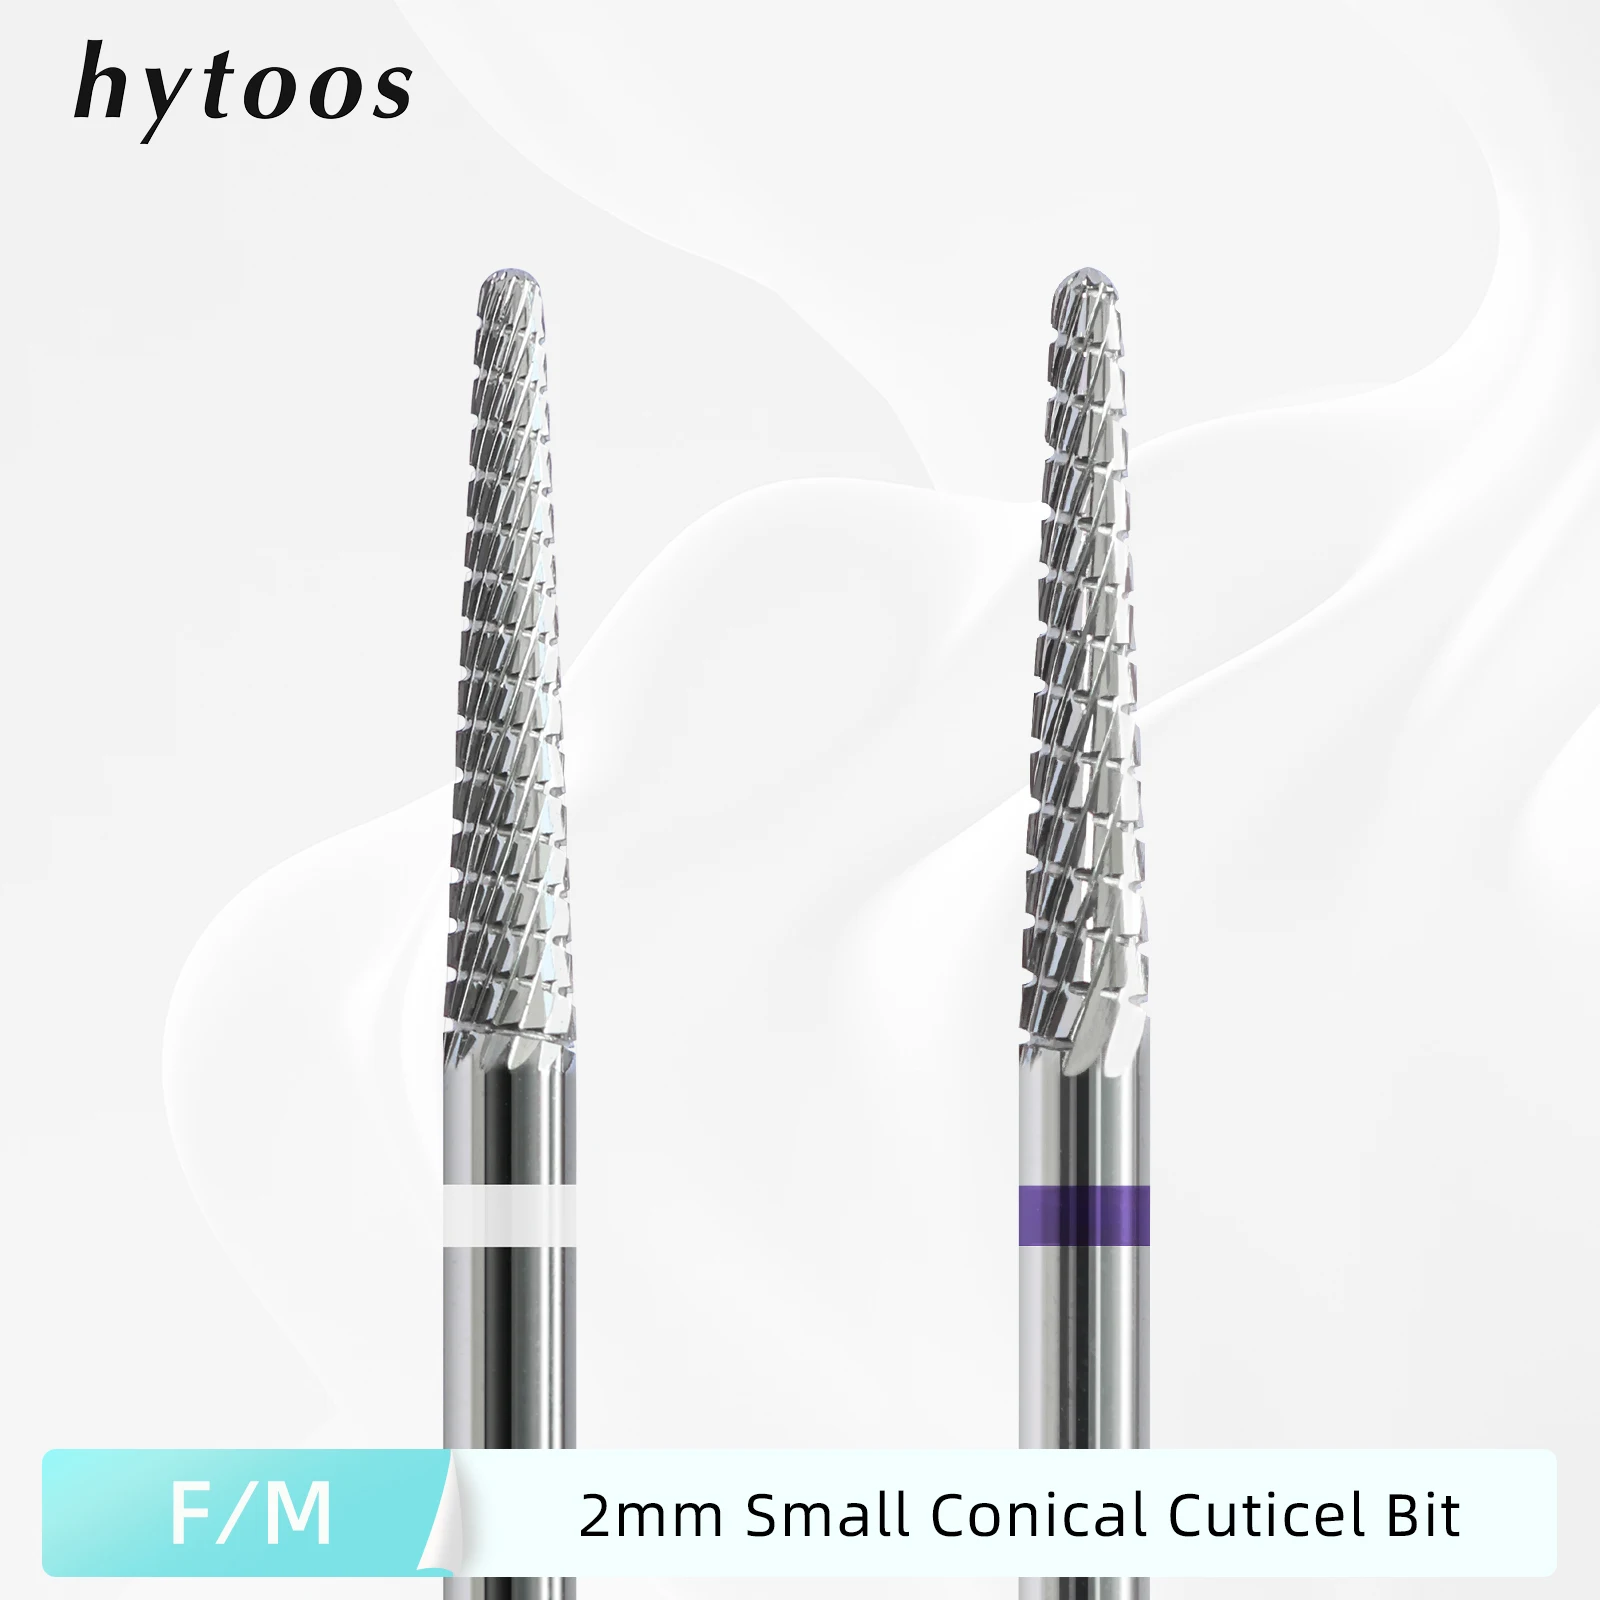 HYTOOS Small Cone Cuticle Clean Nail Drill Bits 3/32 Conical Carbide Nail Bit, Professional Safety Under Nails Dead Skin Cleaner